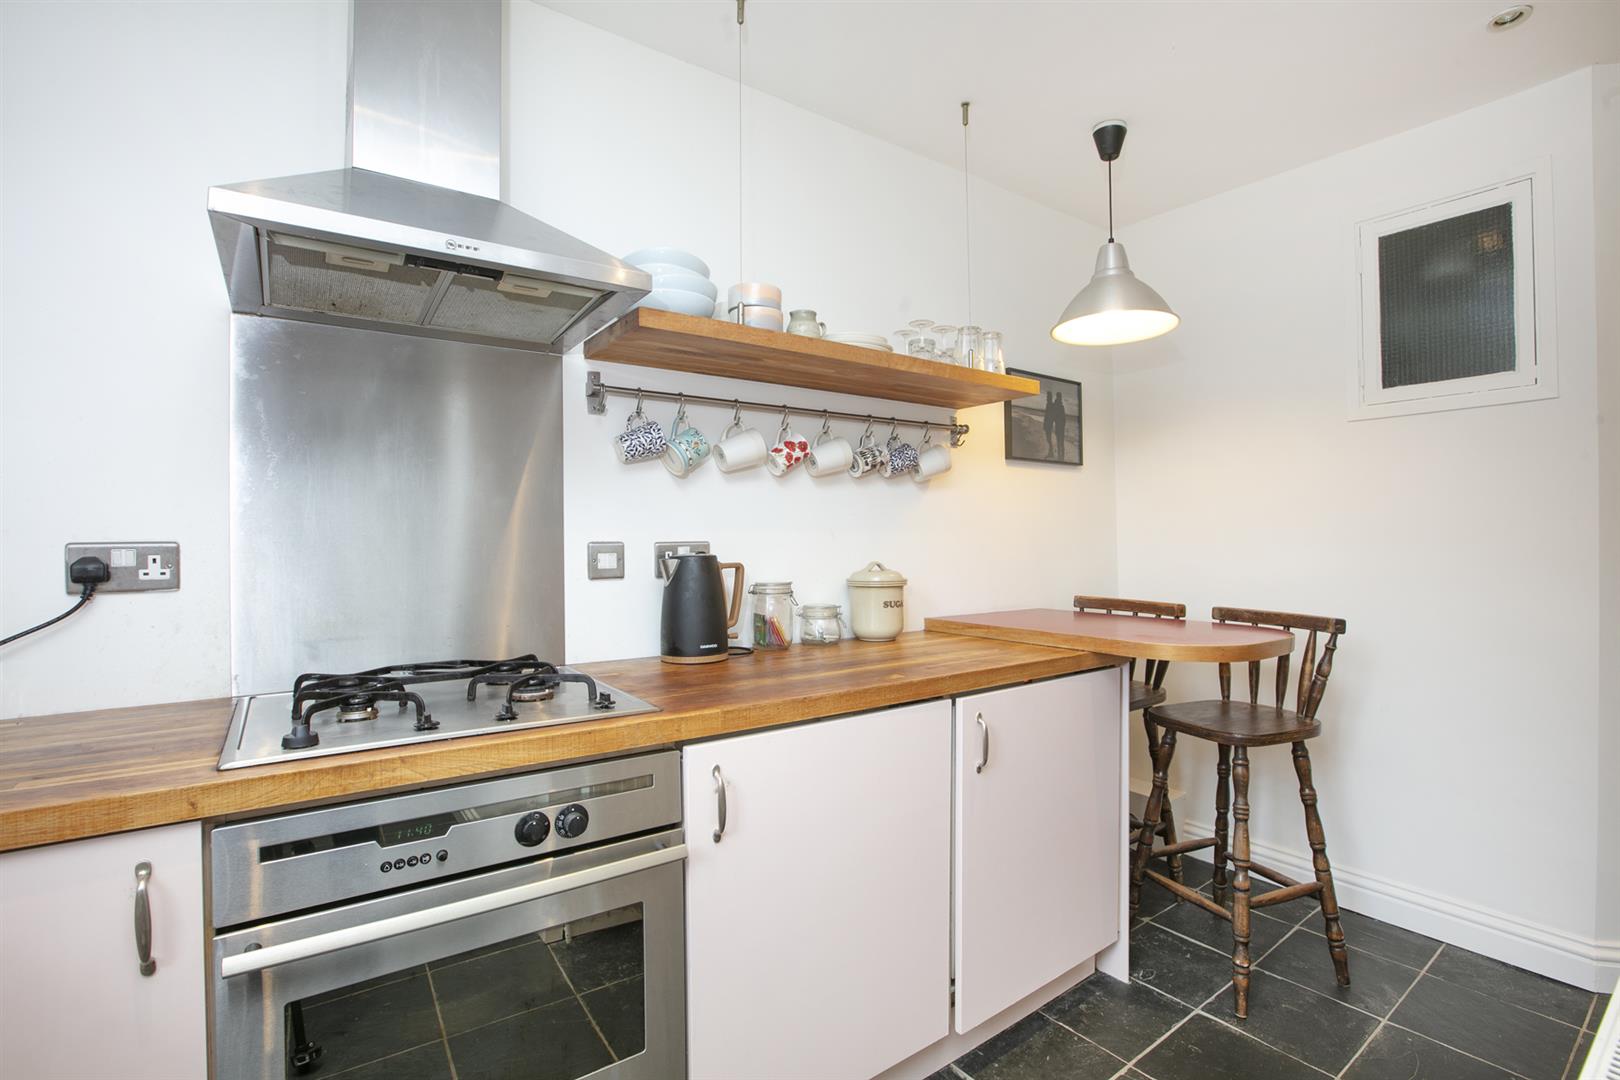 Flat - Conversion For Sale in Peckham Road, Camberwell, SE5 859 view3